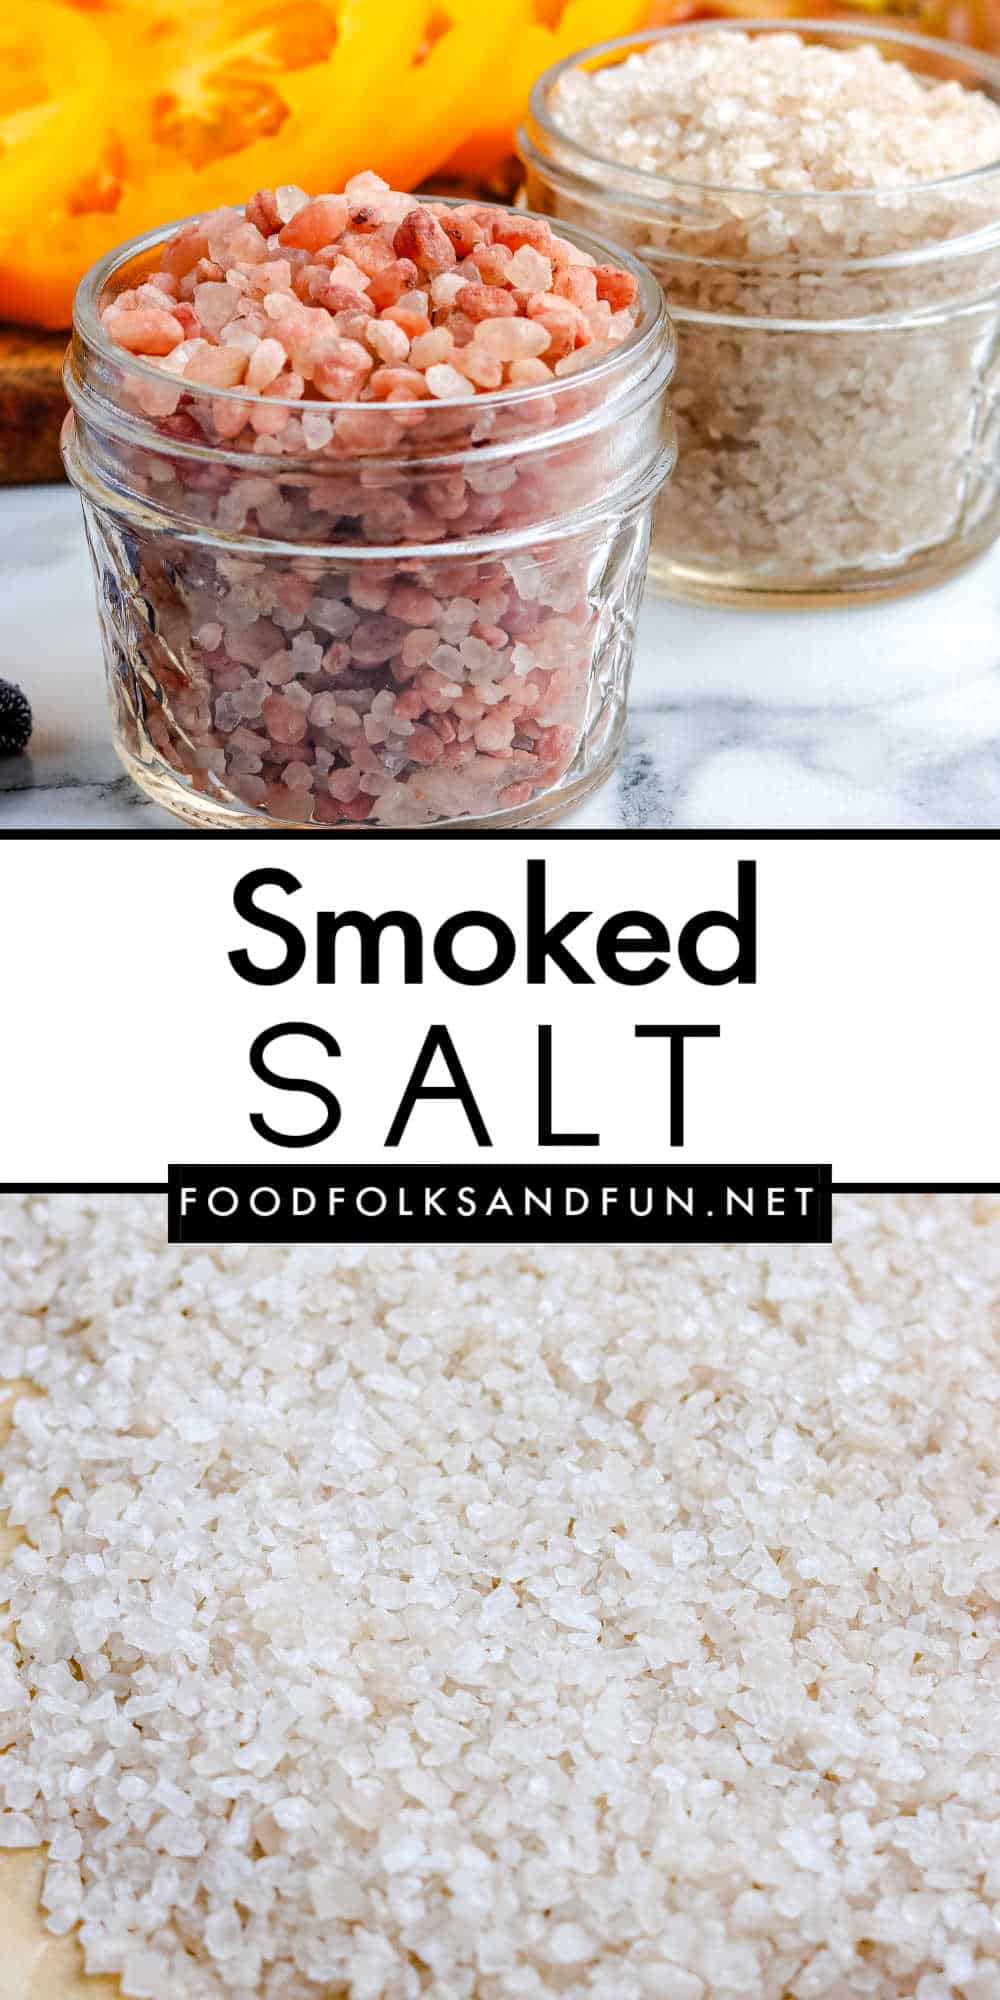 Smoked Salt is a great way to infuse a smoky flavor into food. This recipe is easy to make, and it lasts for months. via @foodfolksandfun